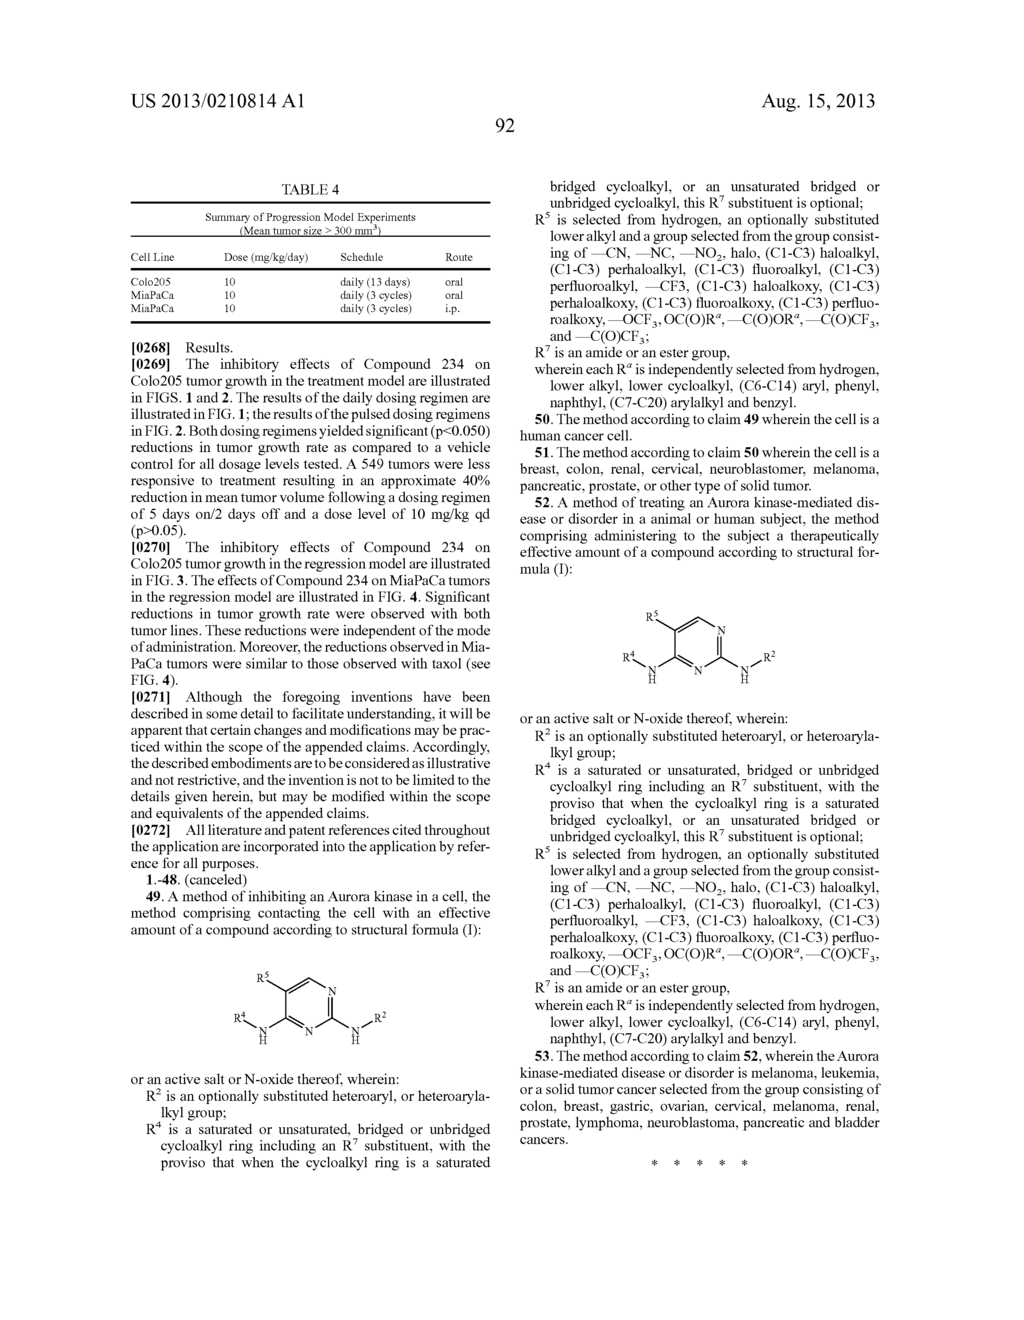 Cycloalkyl Substituted Pyrimidinediamine Compounds And Their Uses - diagram, schematic, and image 96